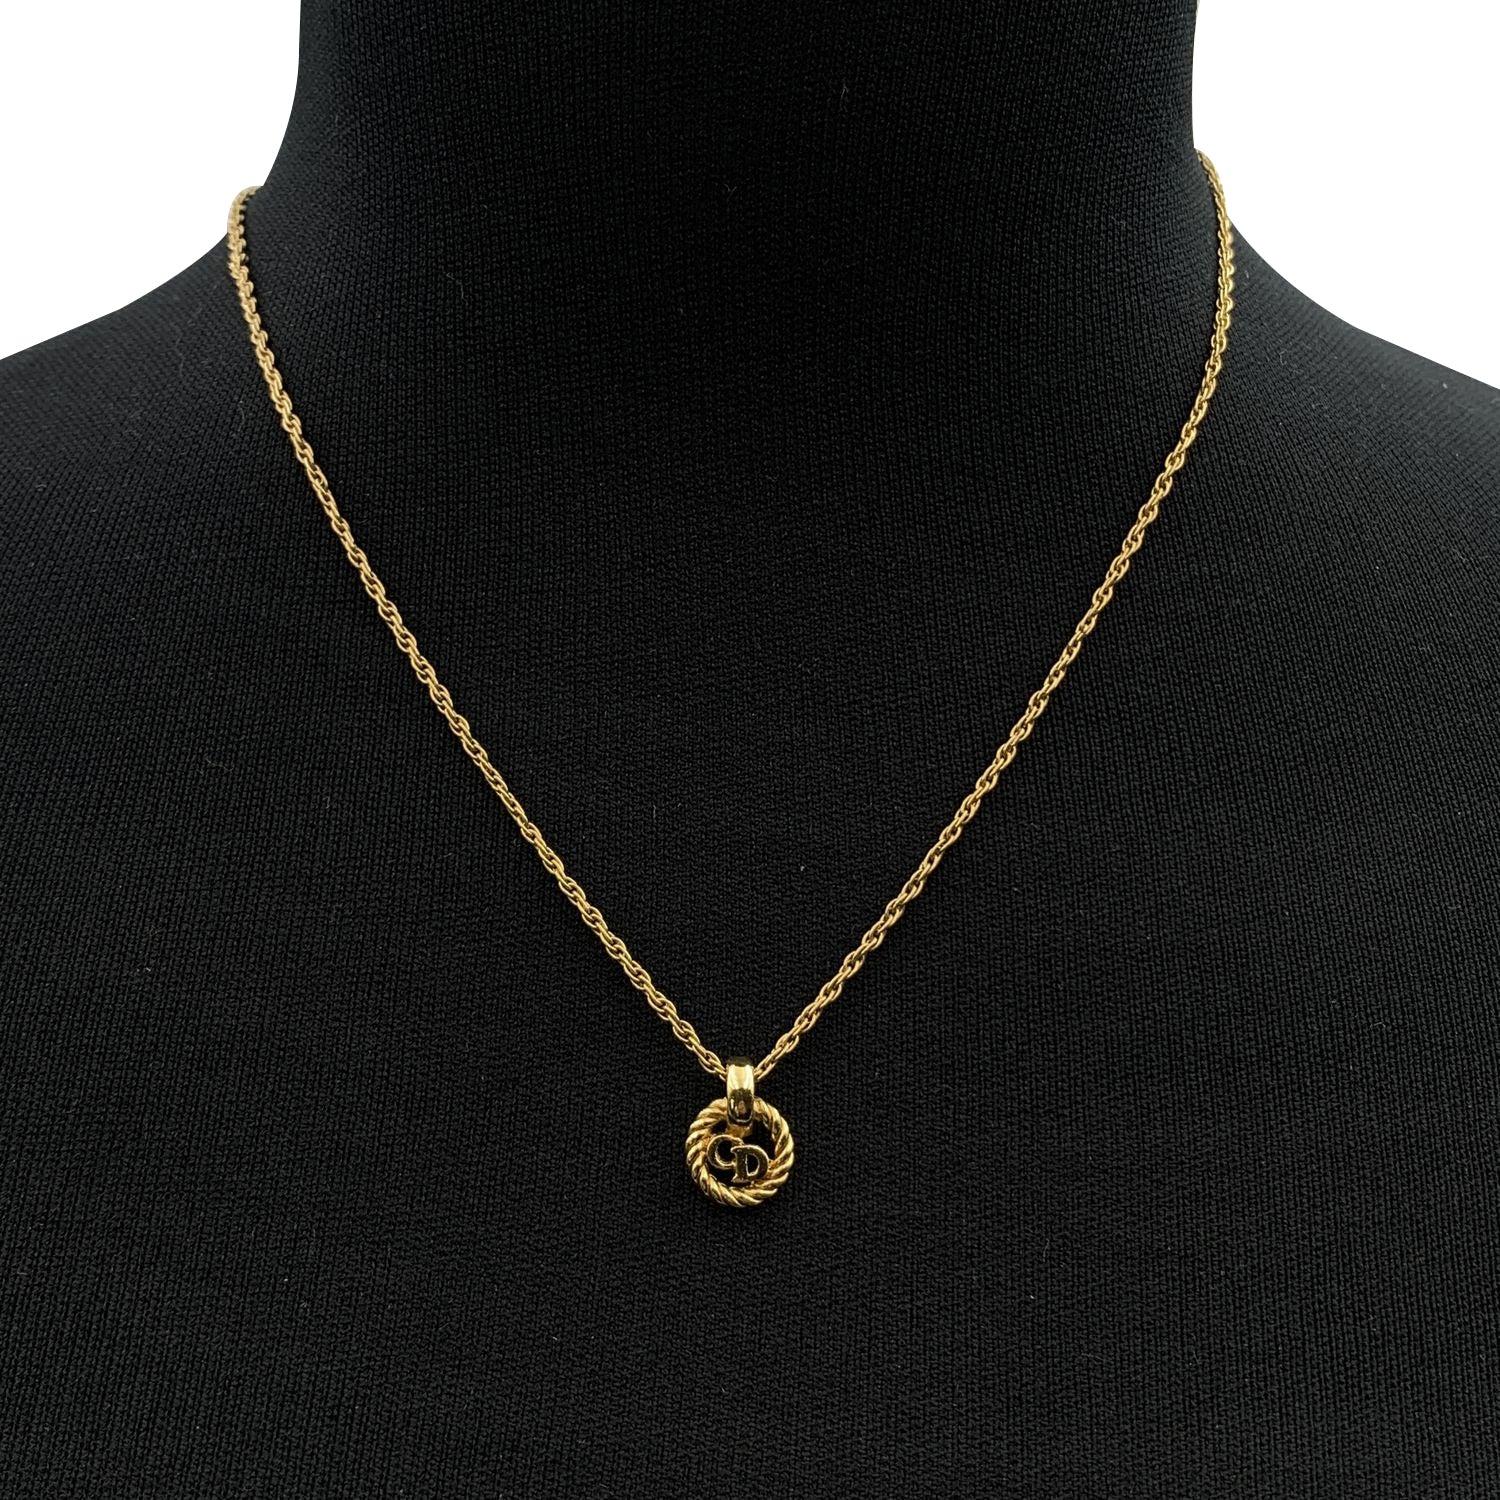 Vintage Christian Dior gold metal chain necklace with small round CD logo pendant. Lobster closure. Small CD charm at the end of the necklace. Chain length: about 16 inches - 40.6 cm Condition A - EXCELLENT Gently used. Please, look carefully at the